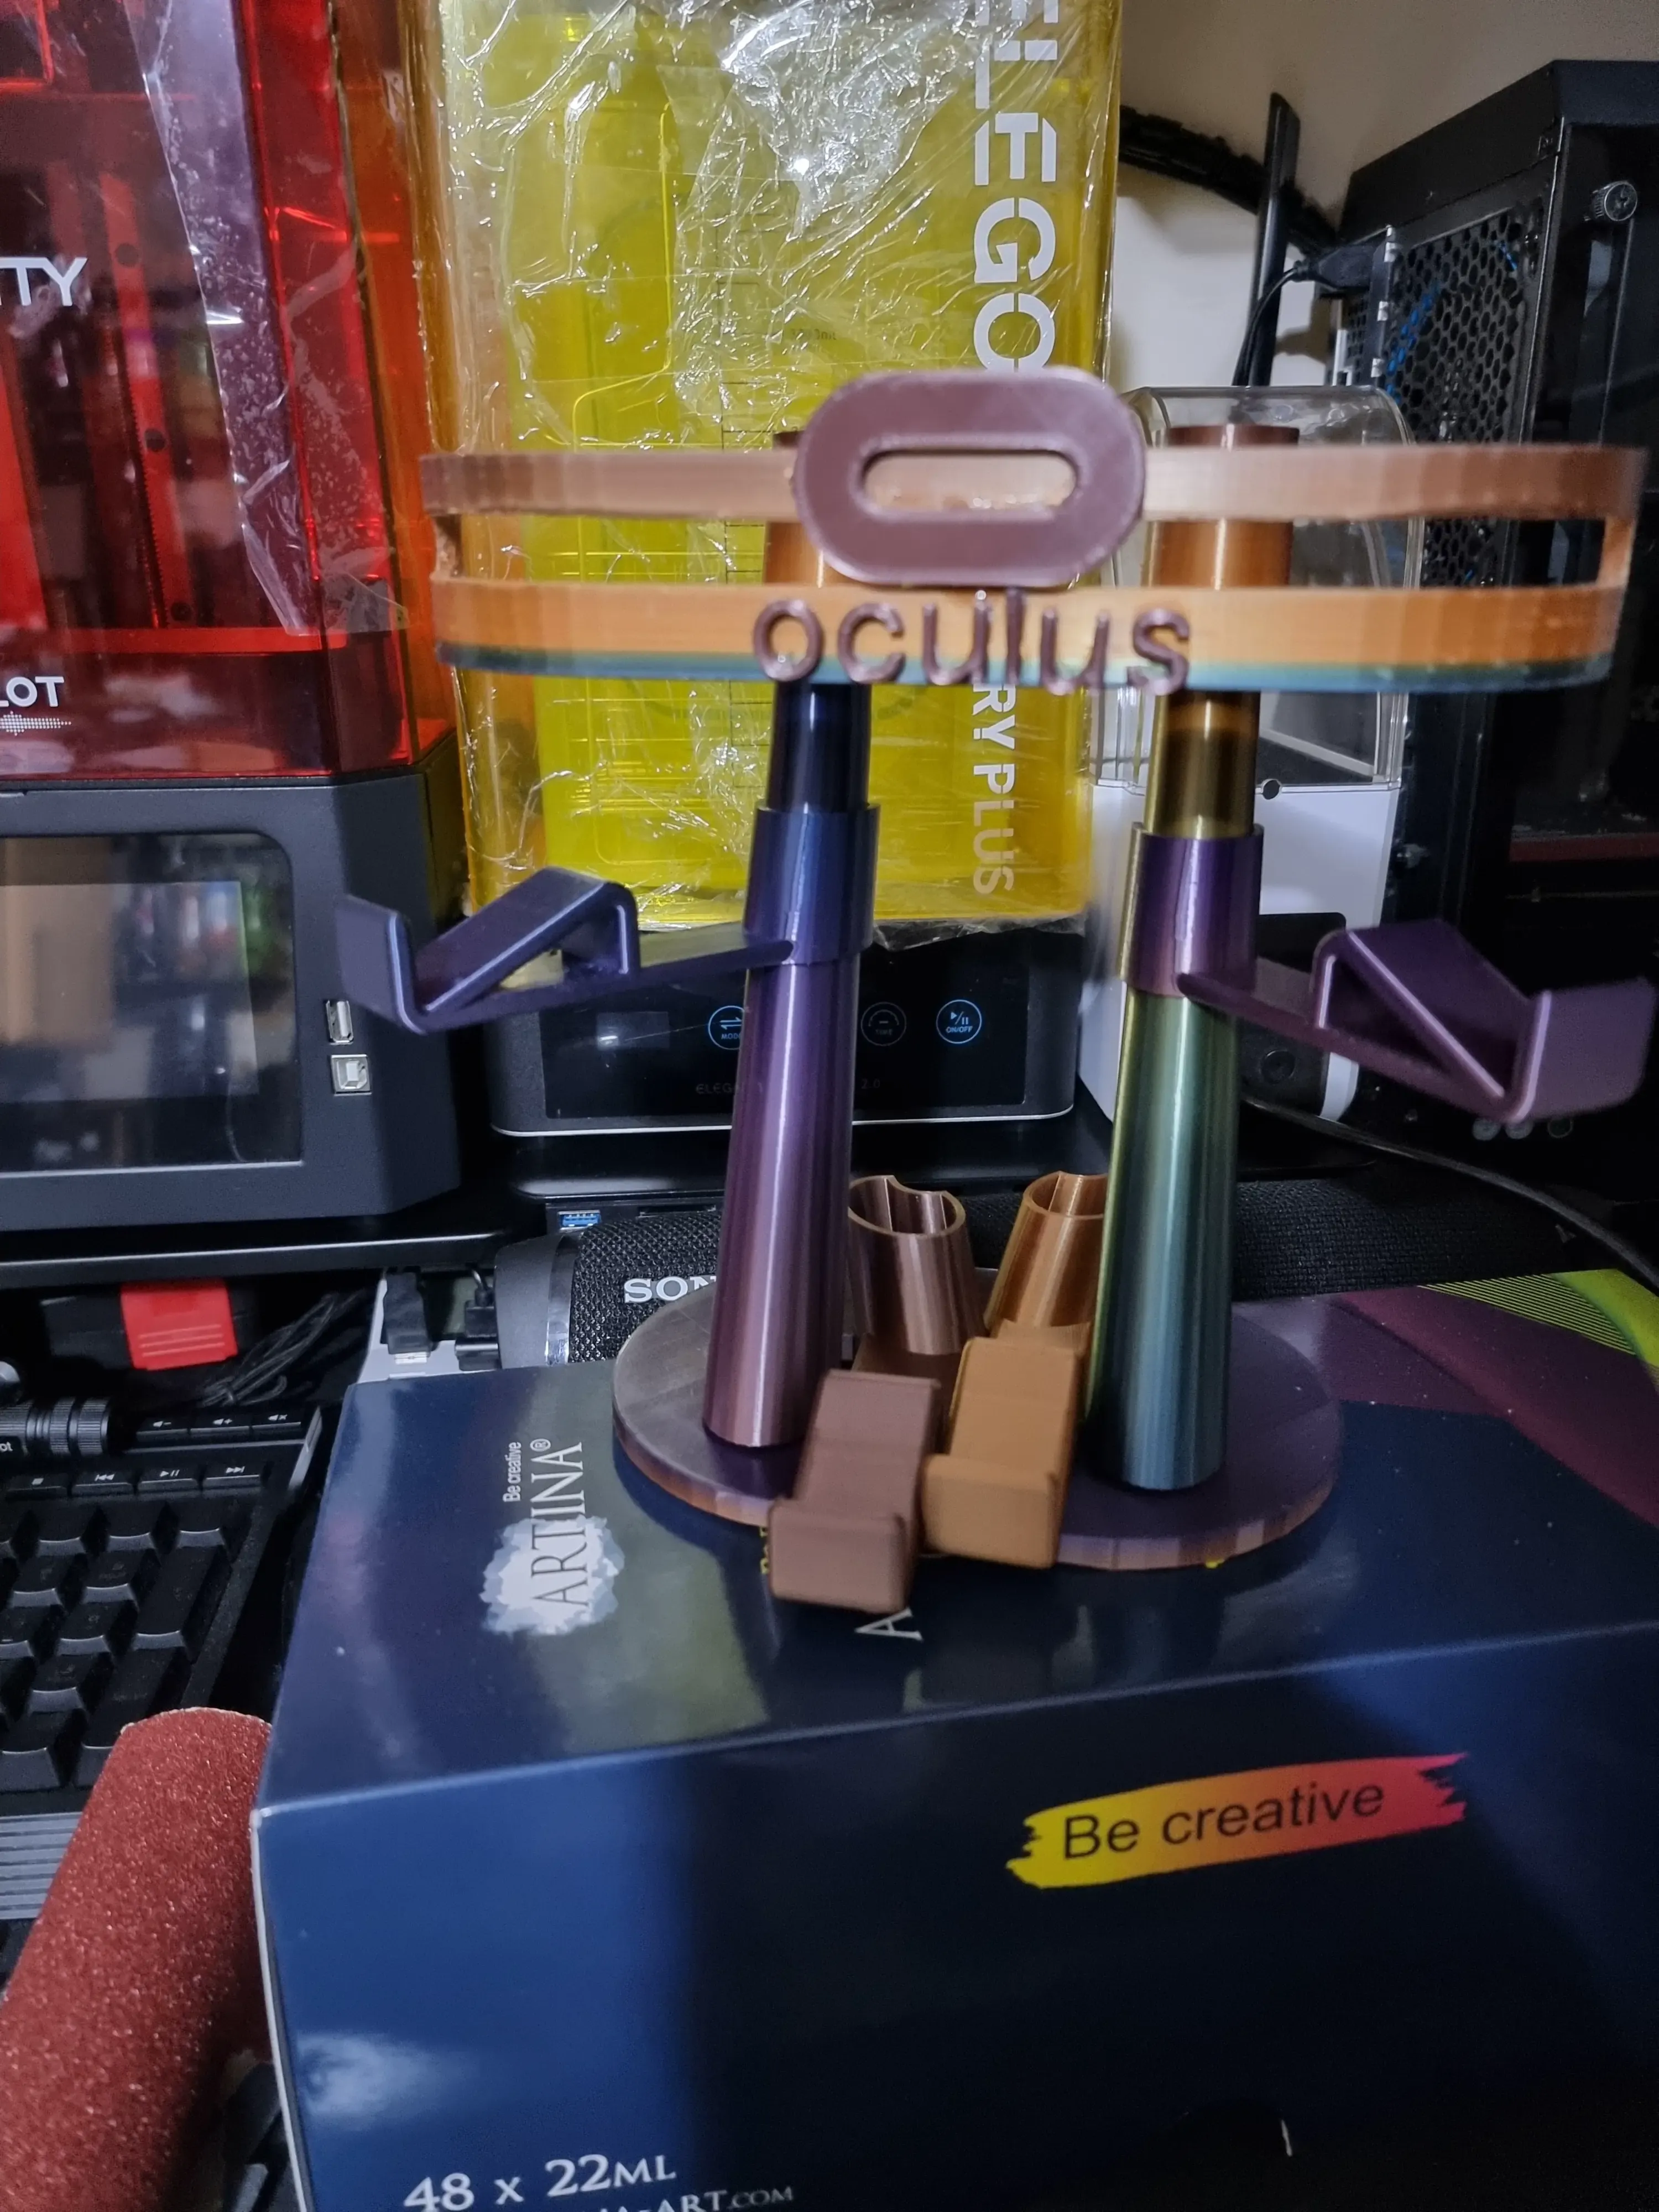 oculus quest 2 stand 